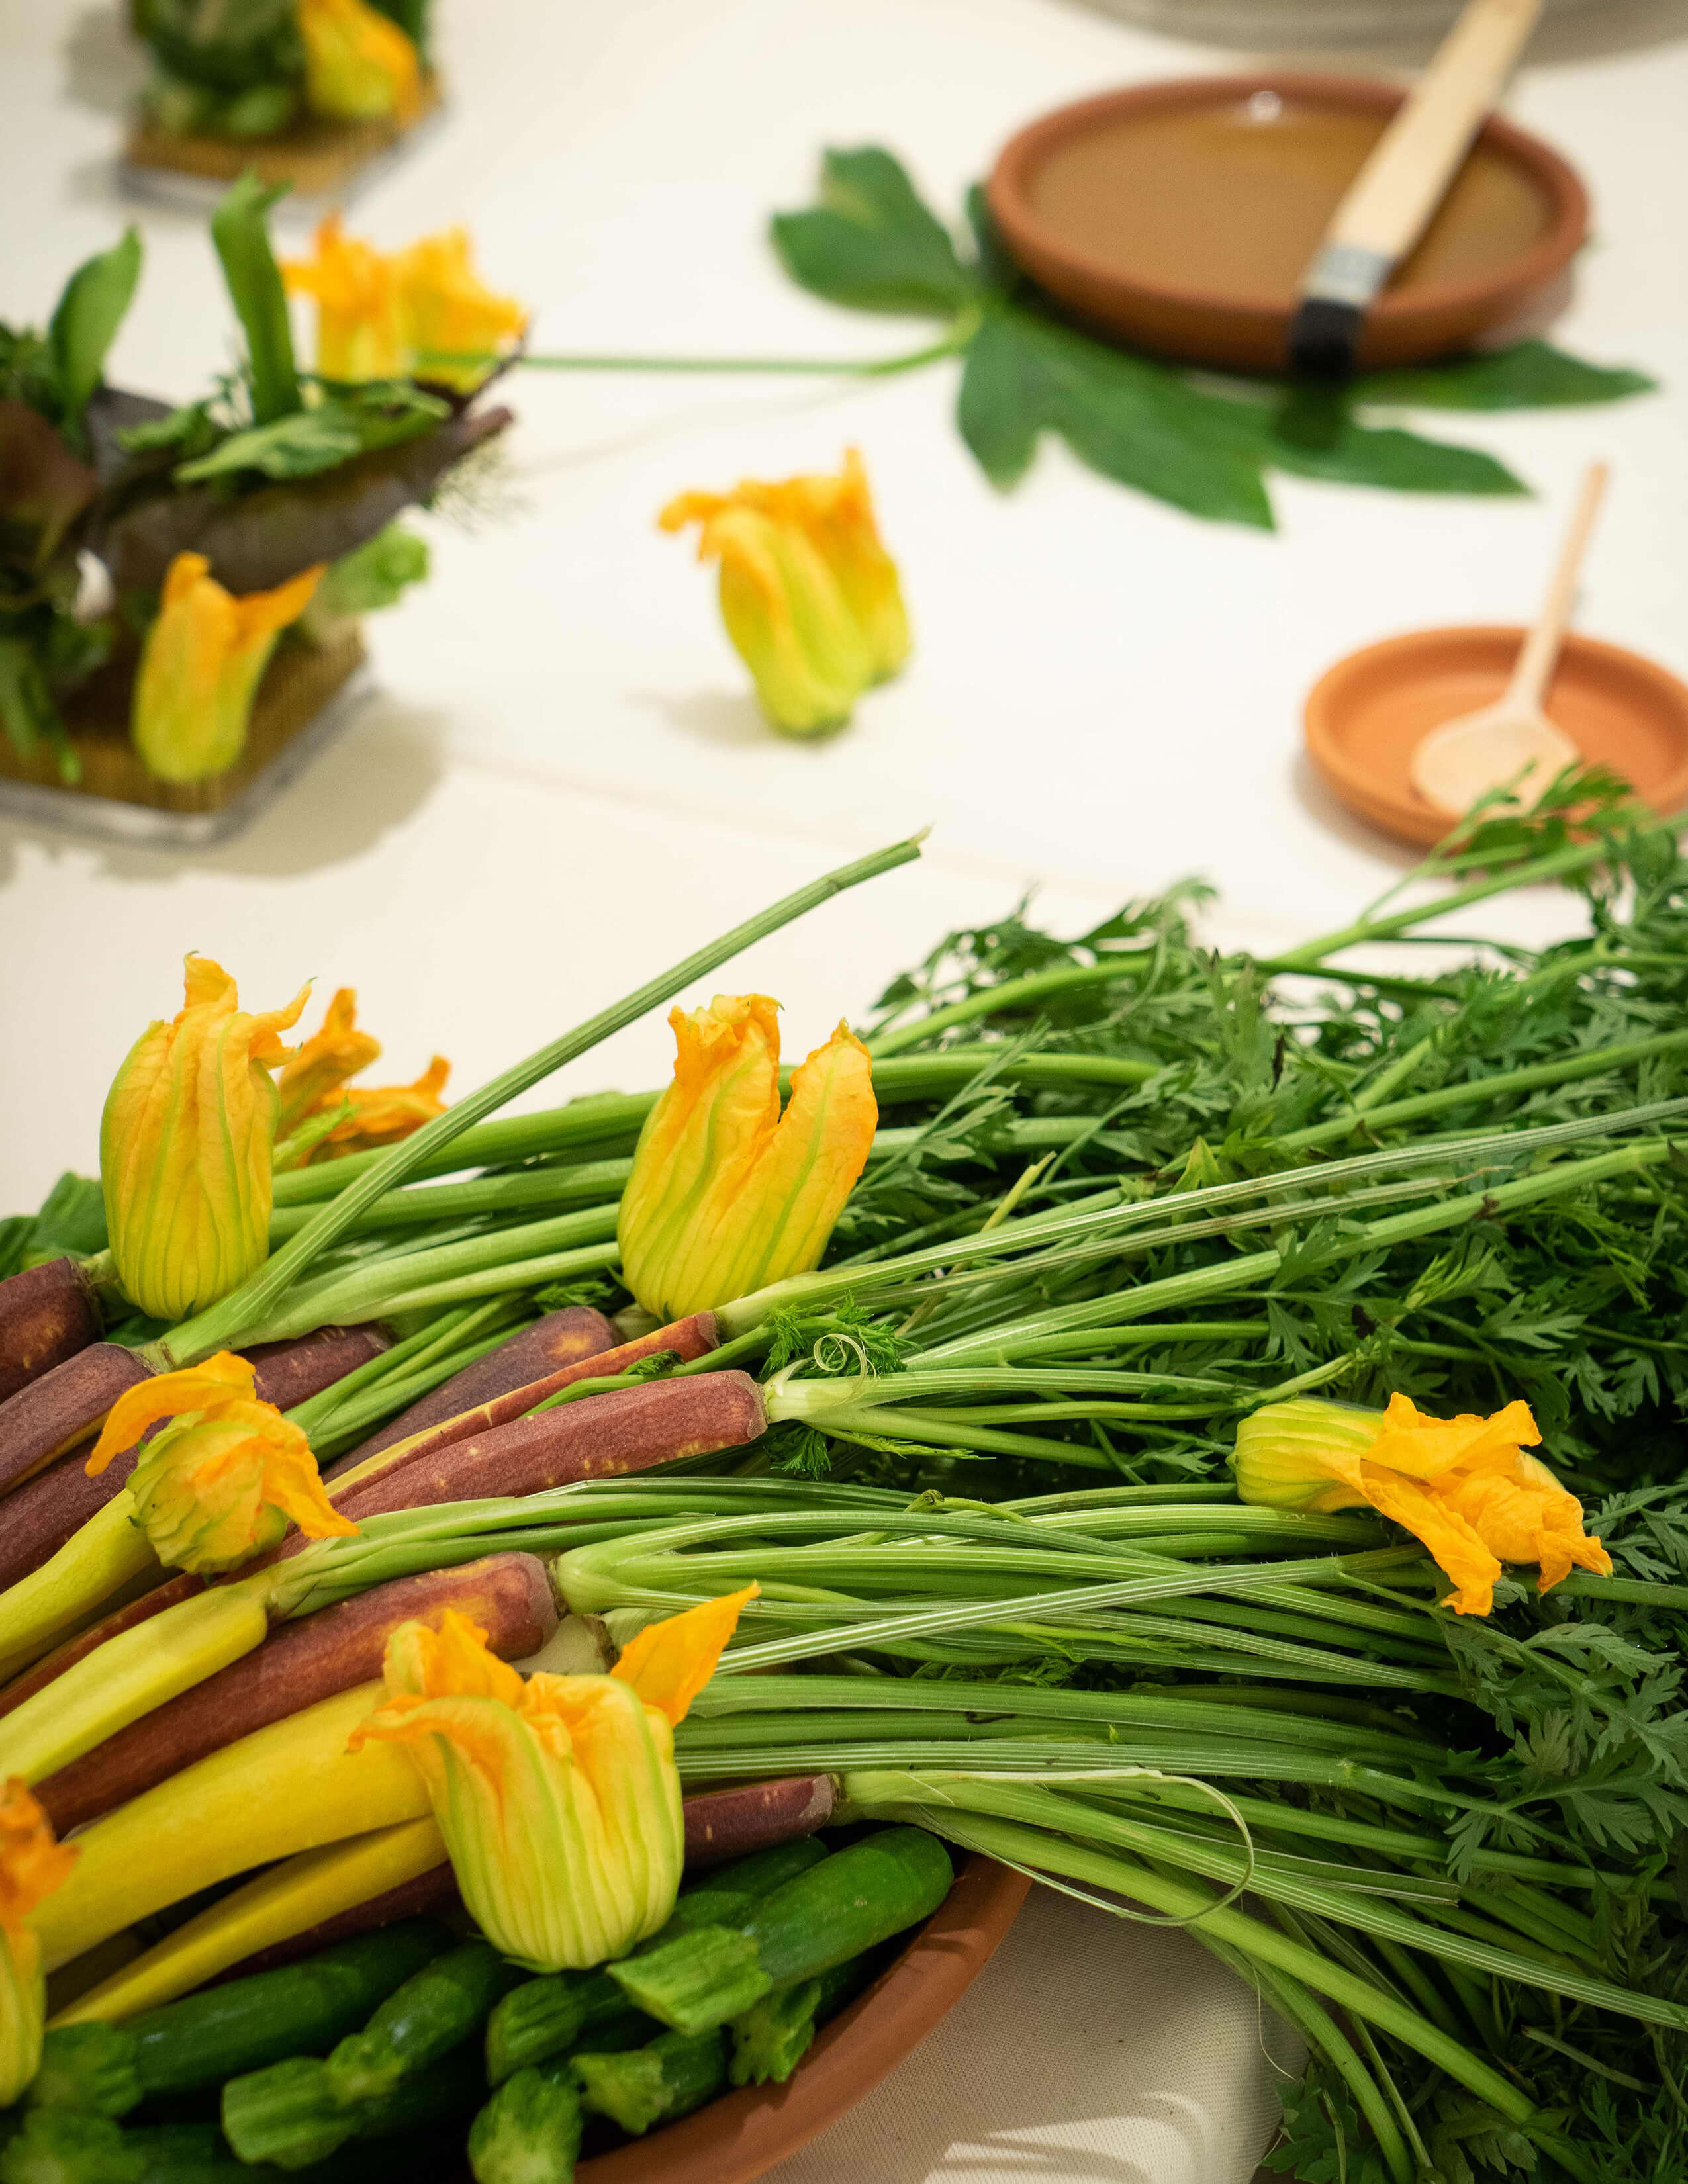 A plate of carrots with stems on, squash blossoms, and zucchinis on the table.